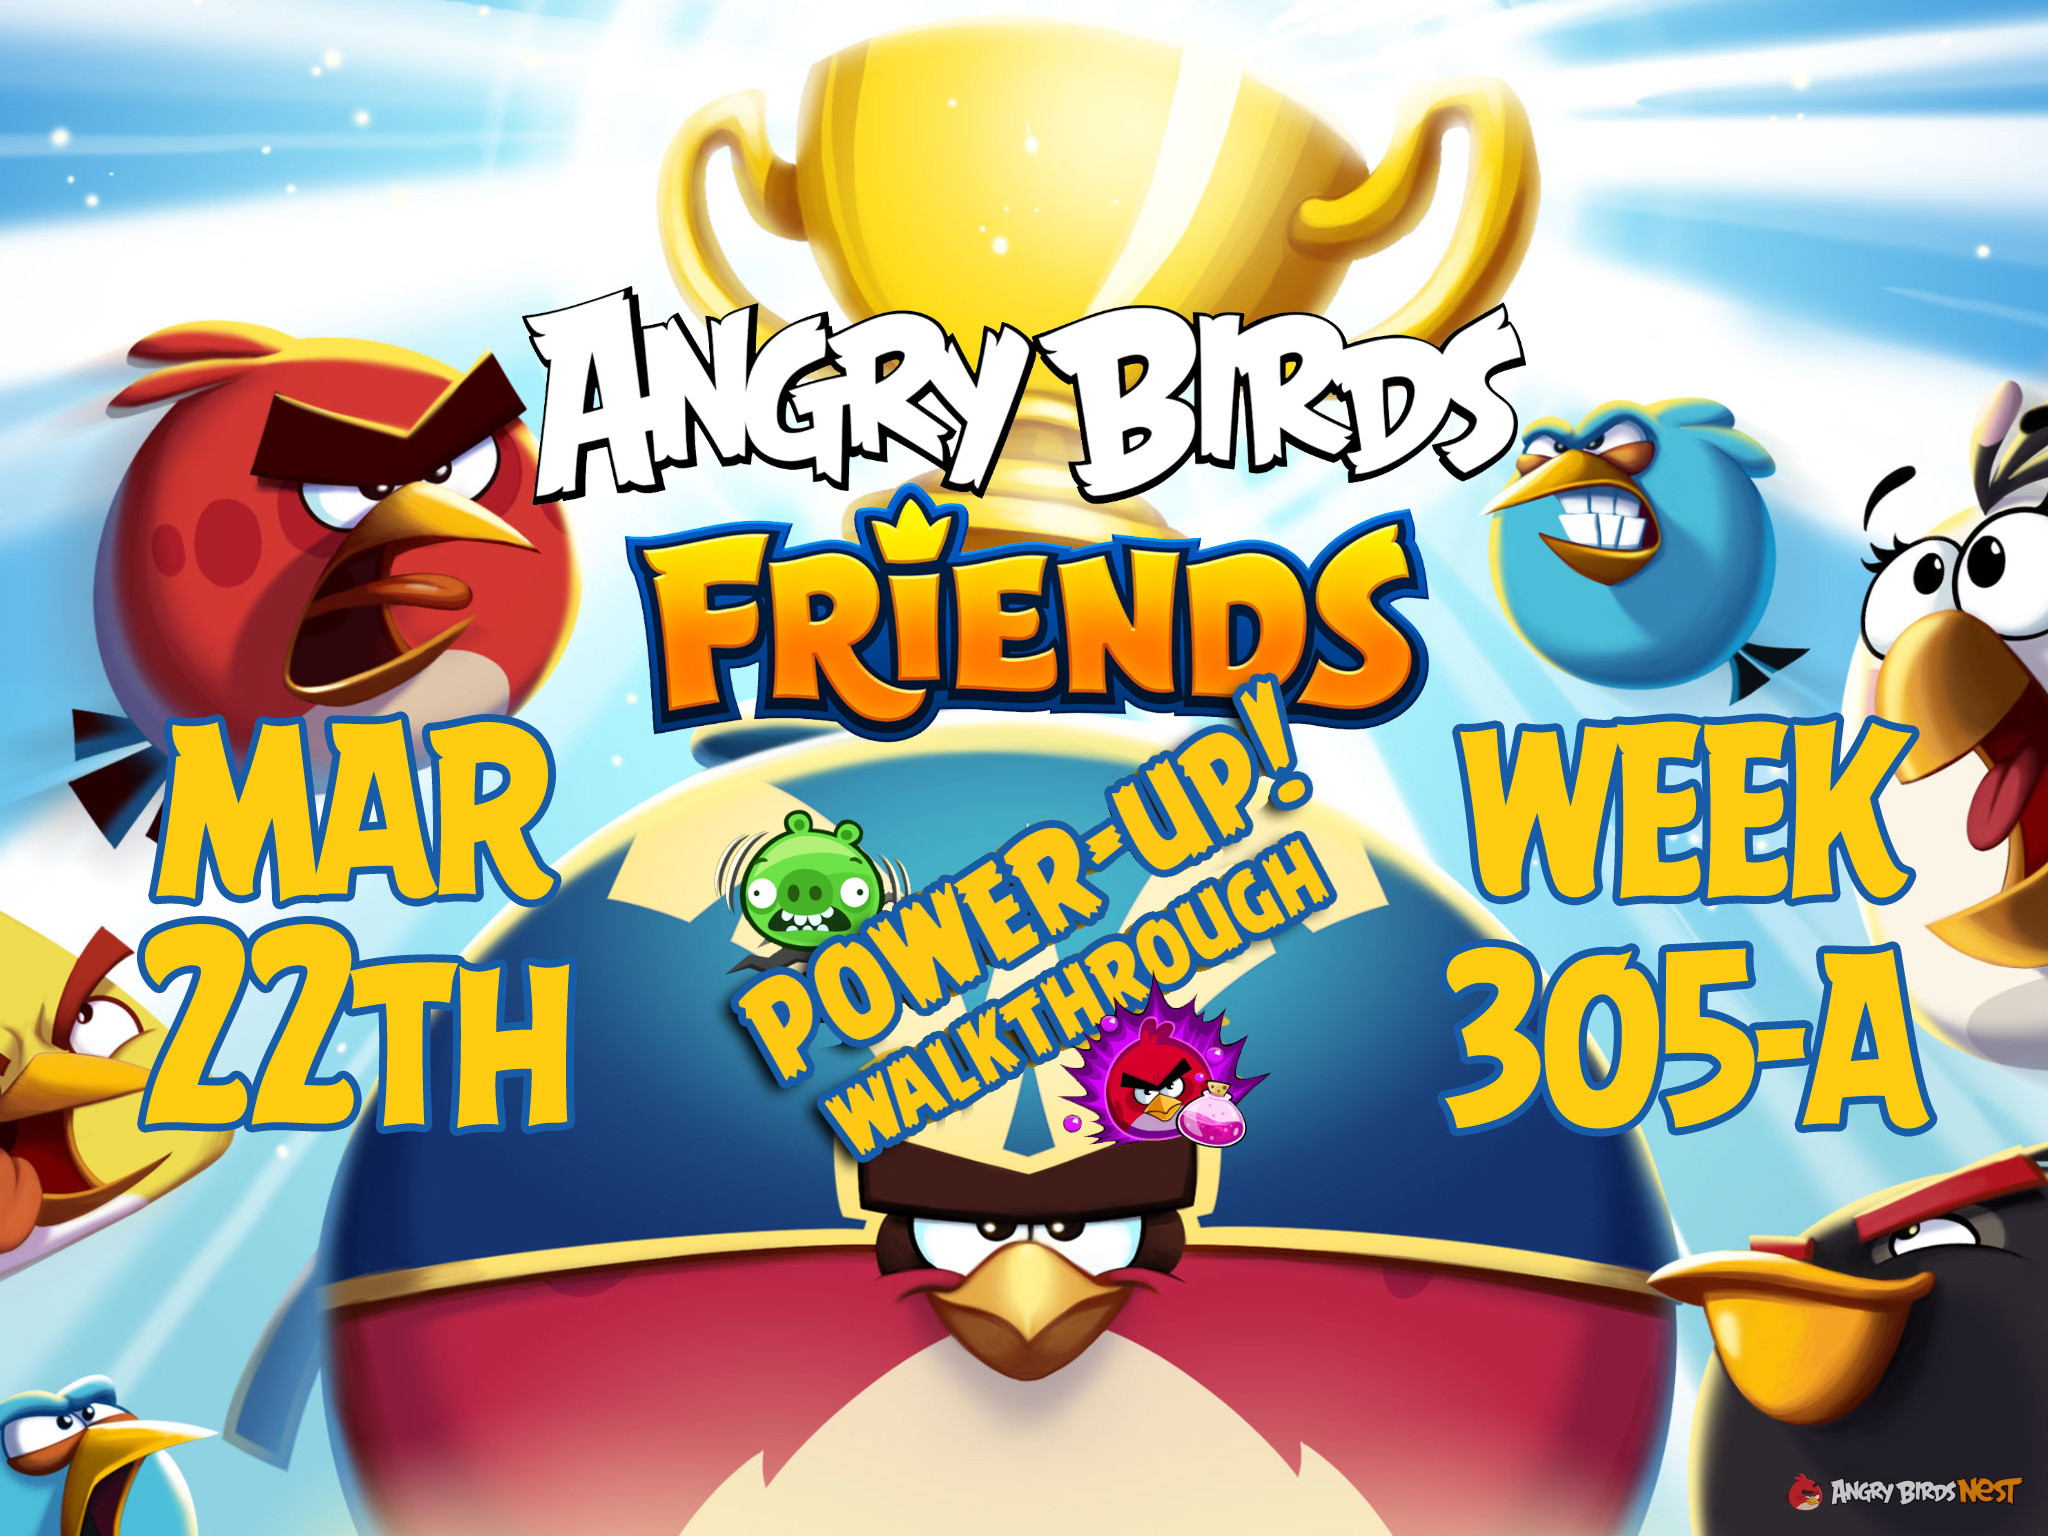 Angry Birds Friends Tournament Week 305-A Feature Image PU